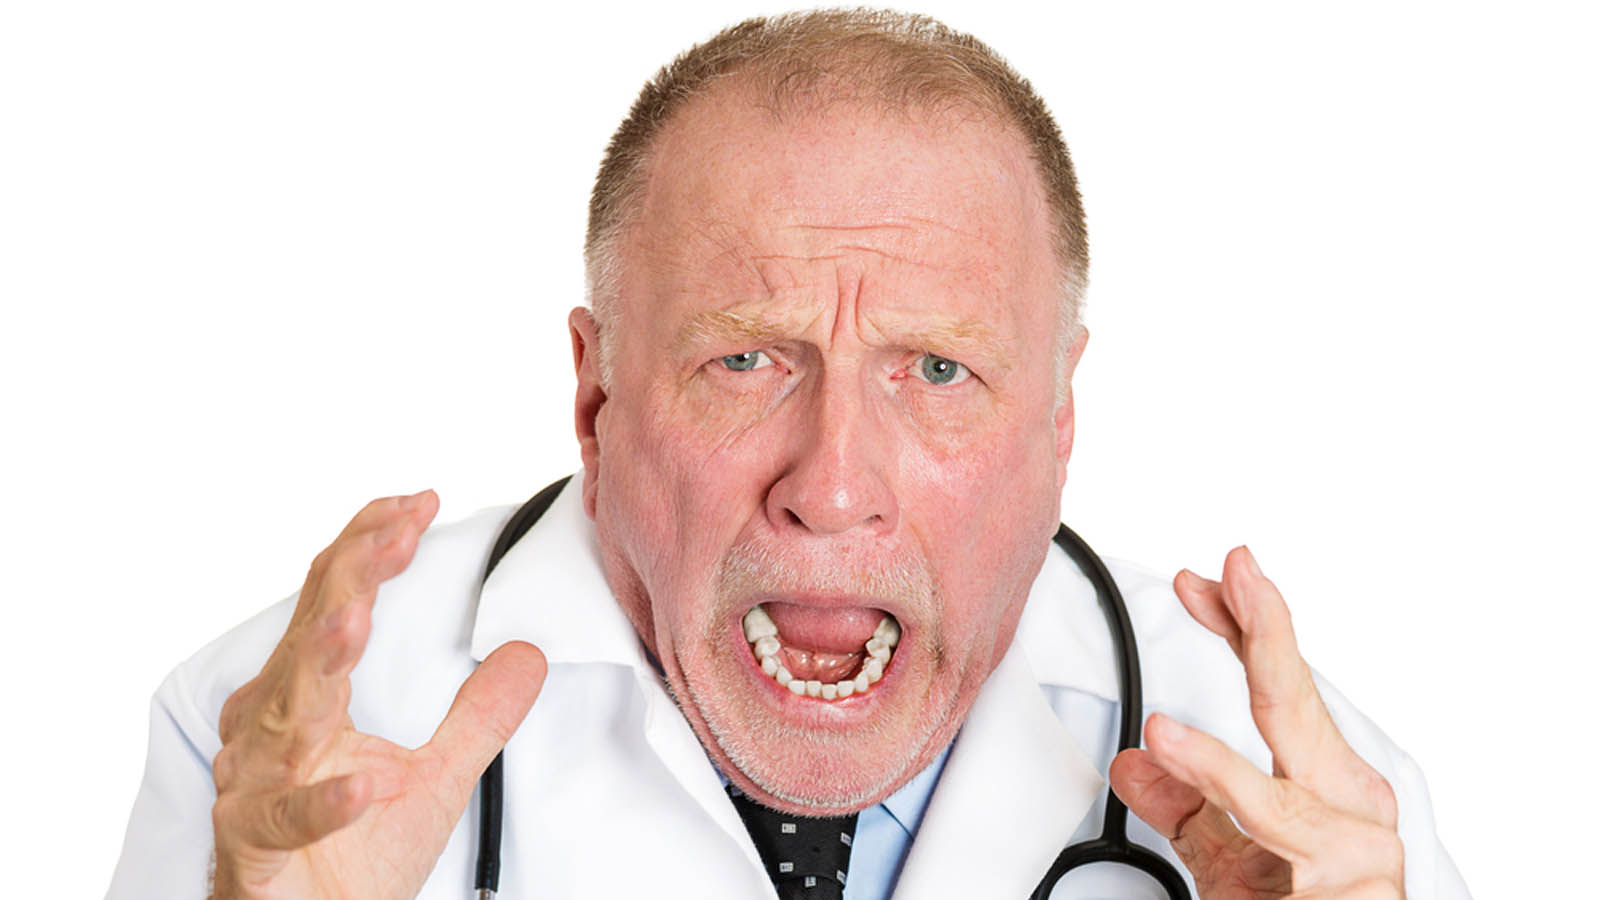 Rudeness is rampant in many medical contexts. Image via Shutterstock.com